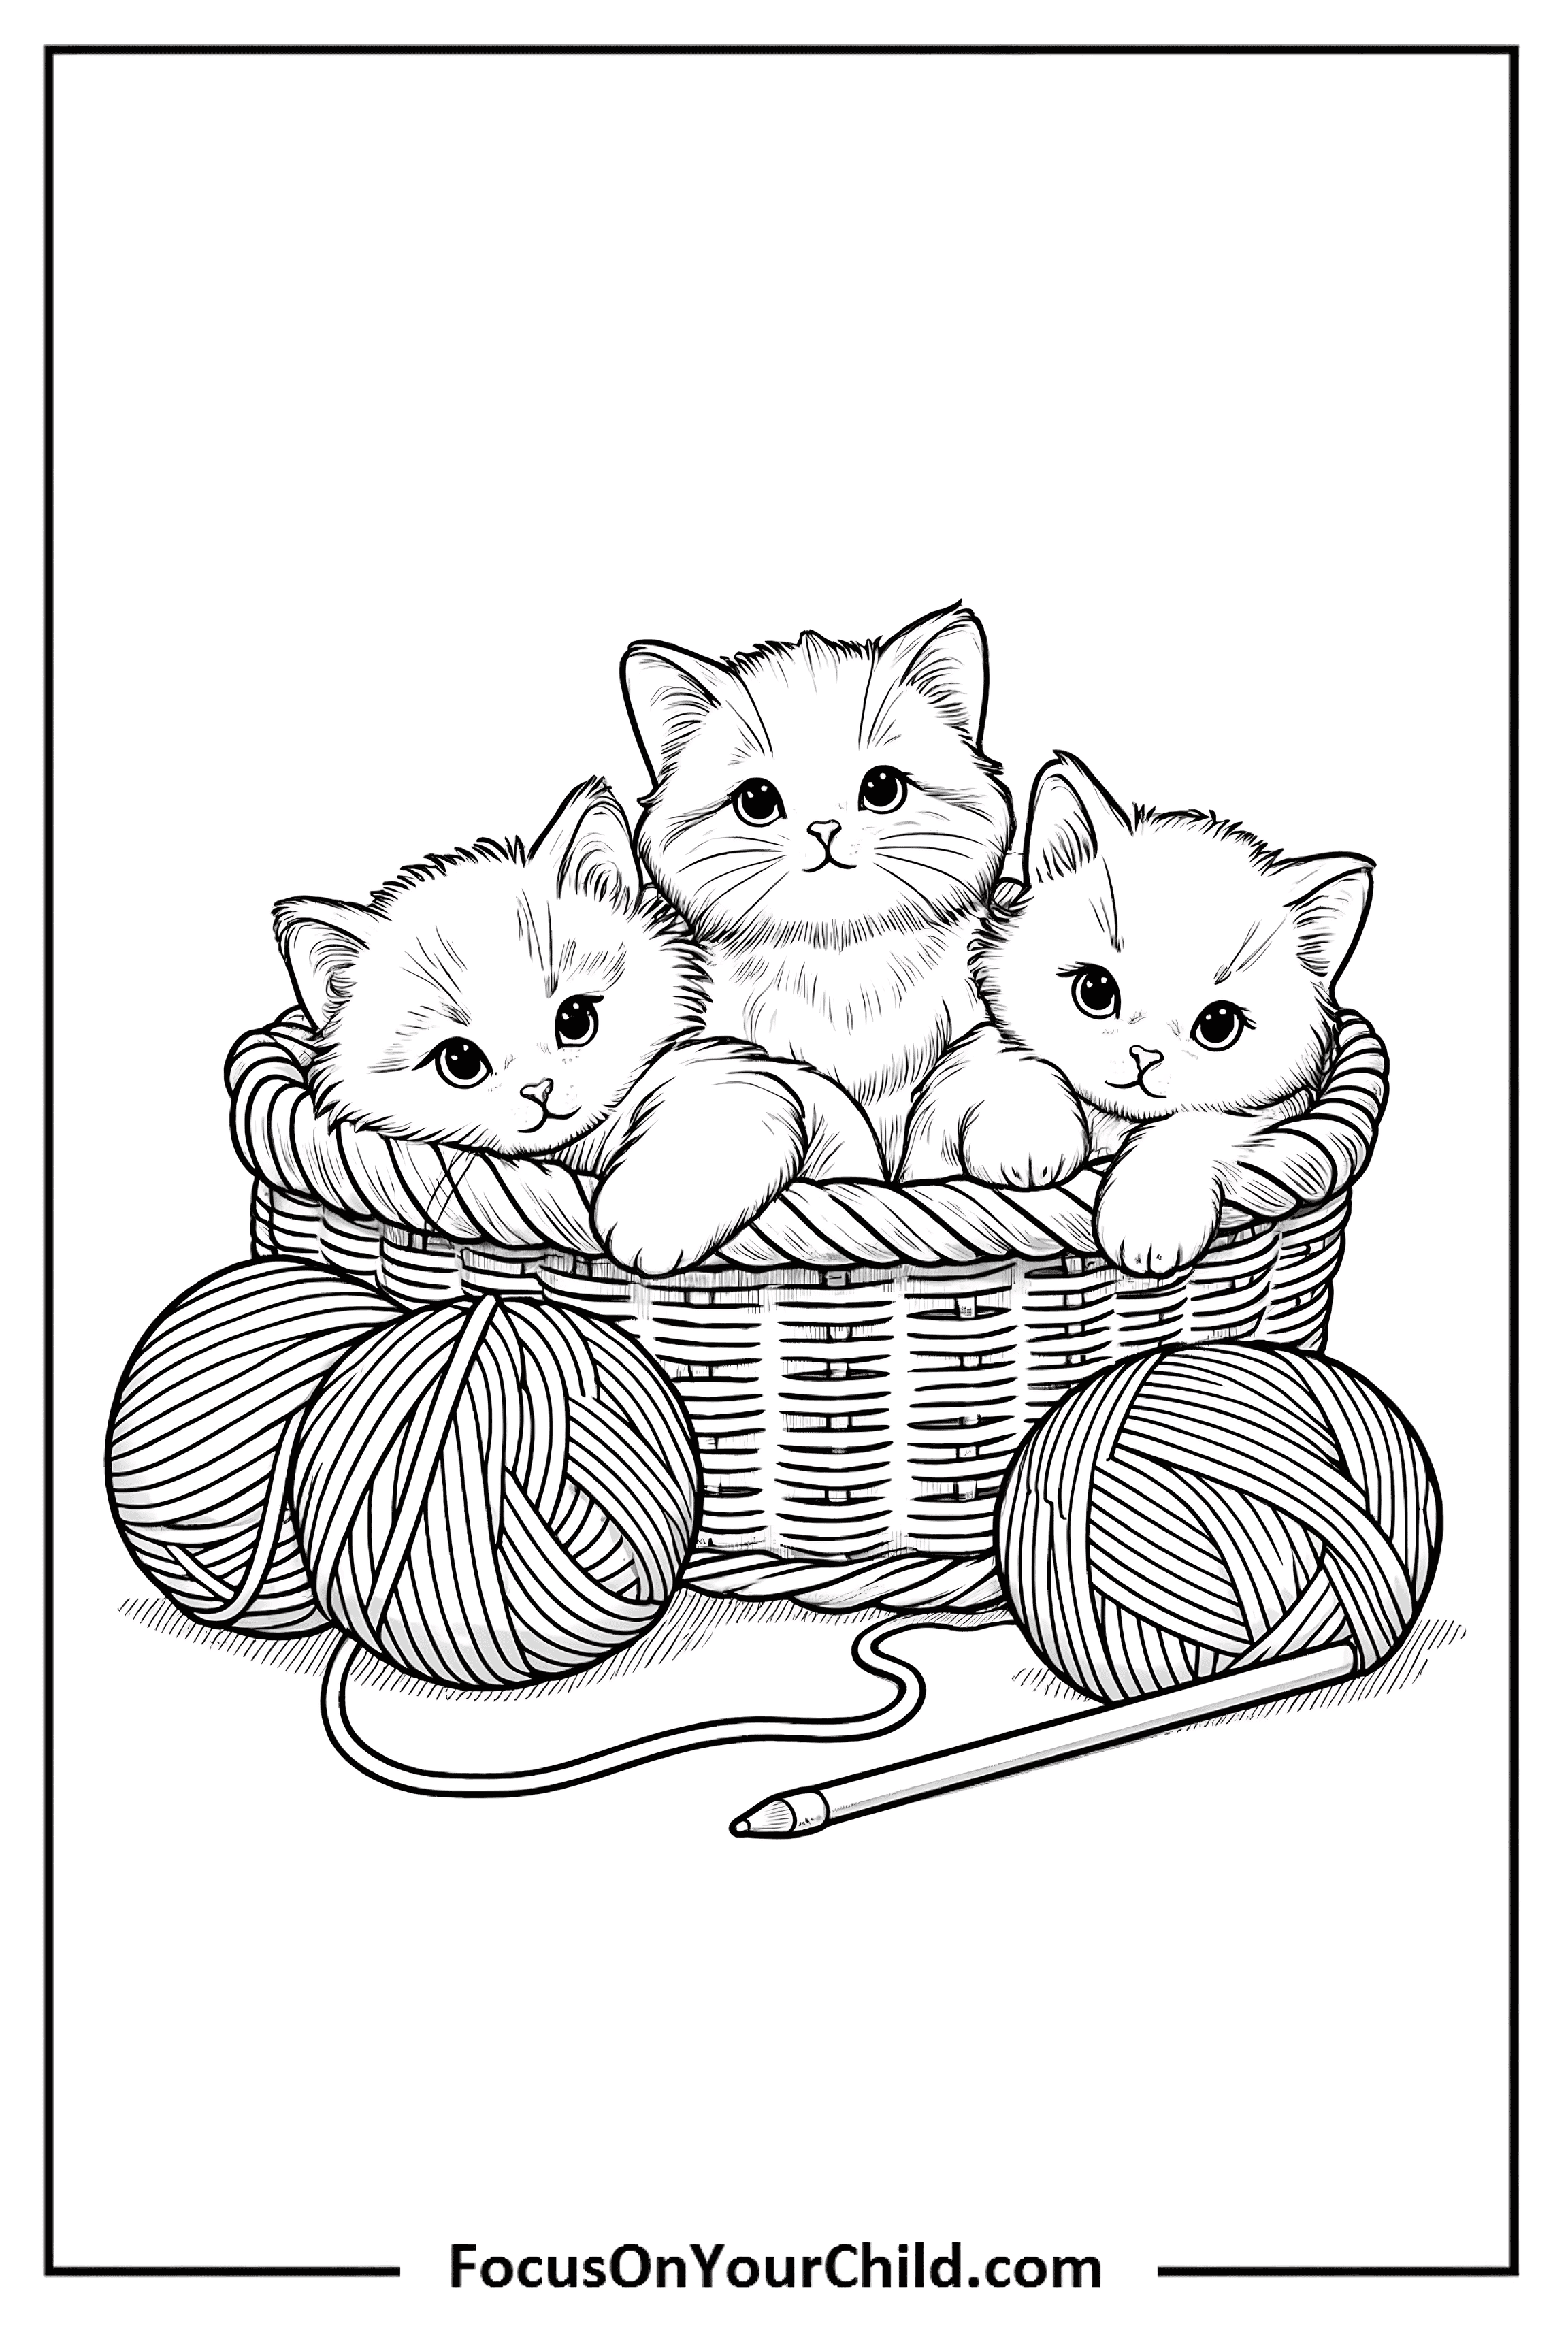 Adorable kittens playing in a basket with yarn.